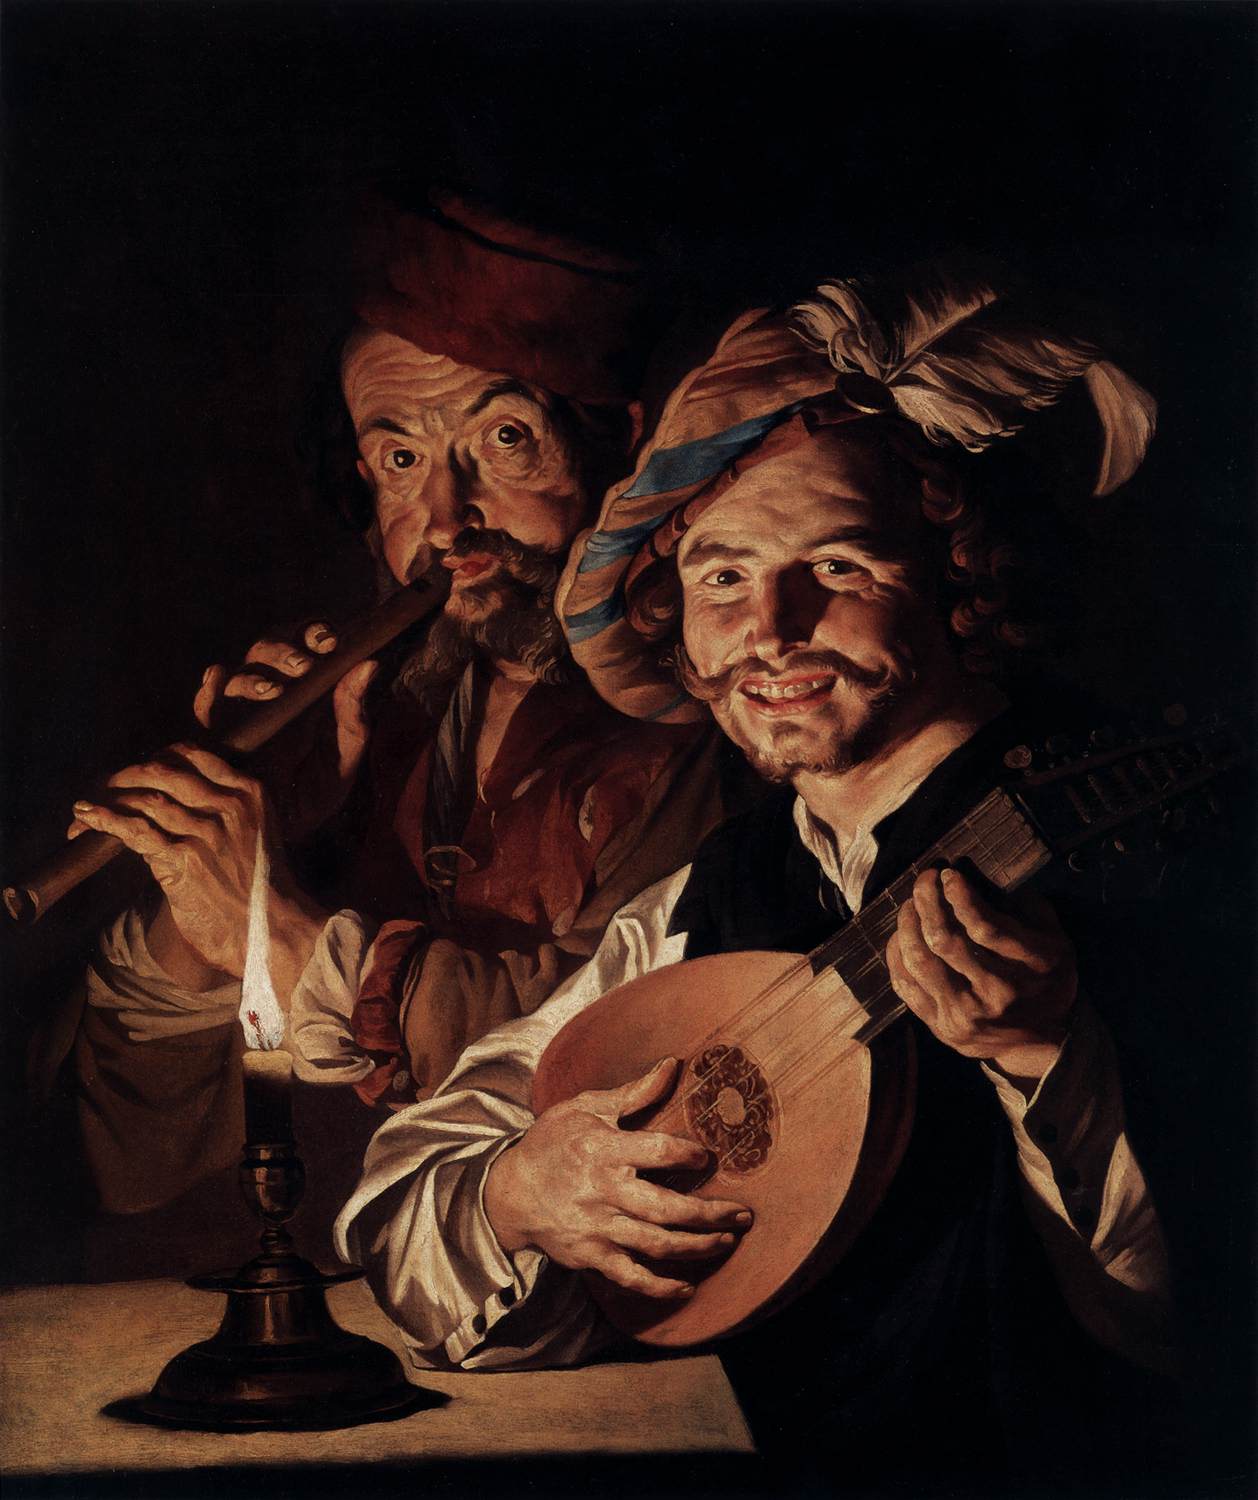 The Lute Player and the Pied Piper